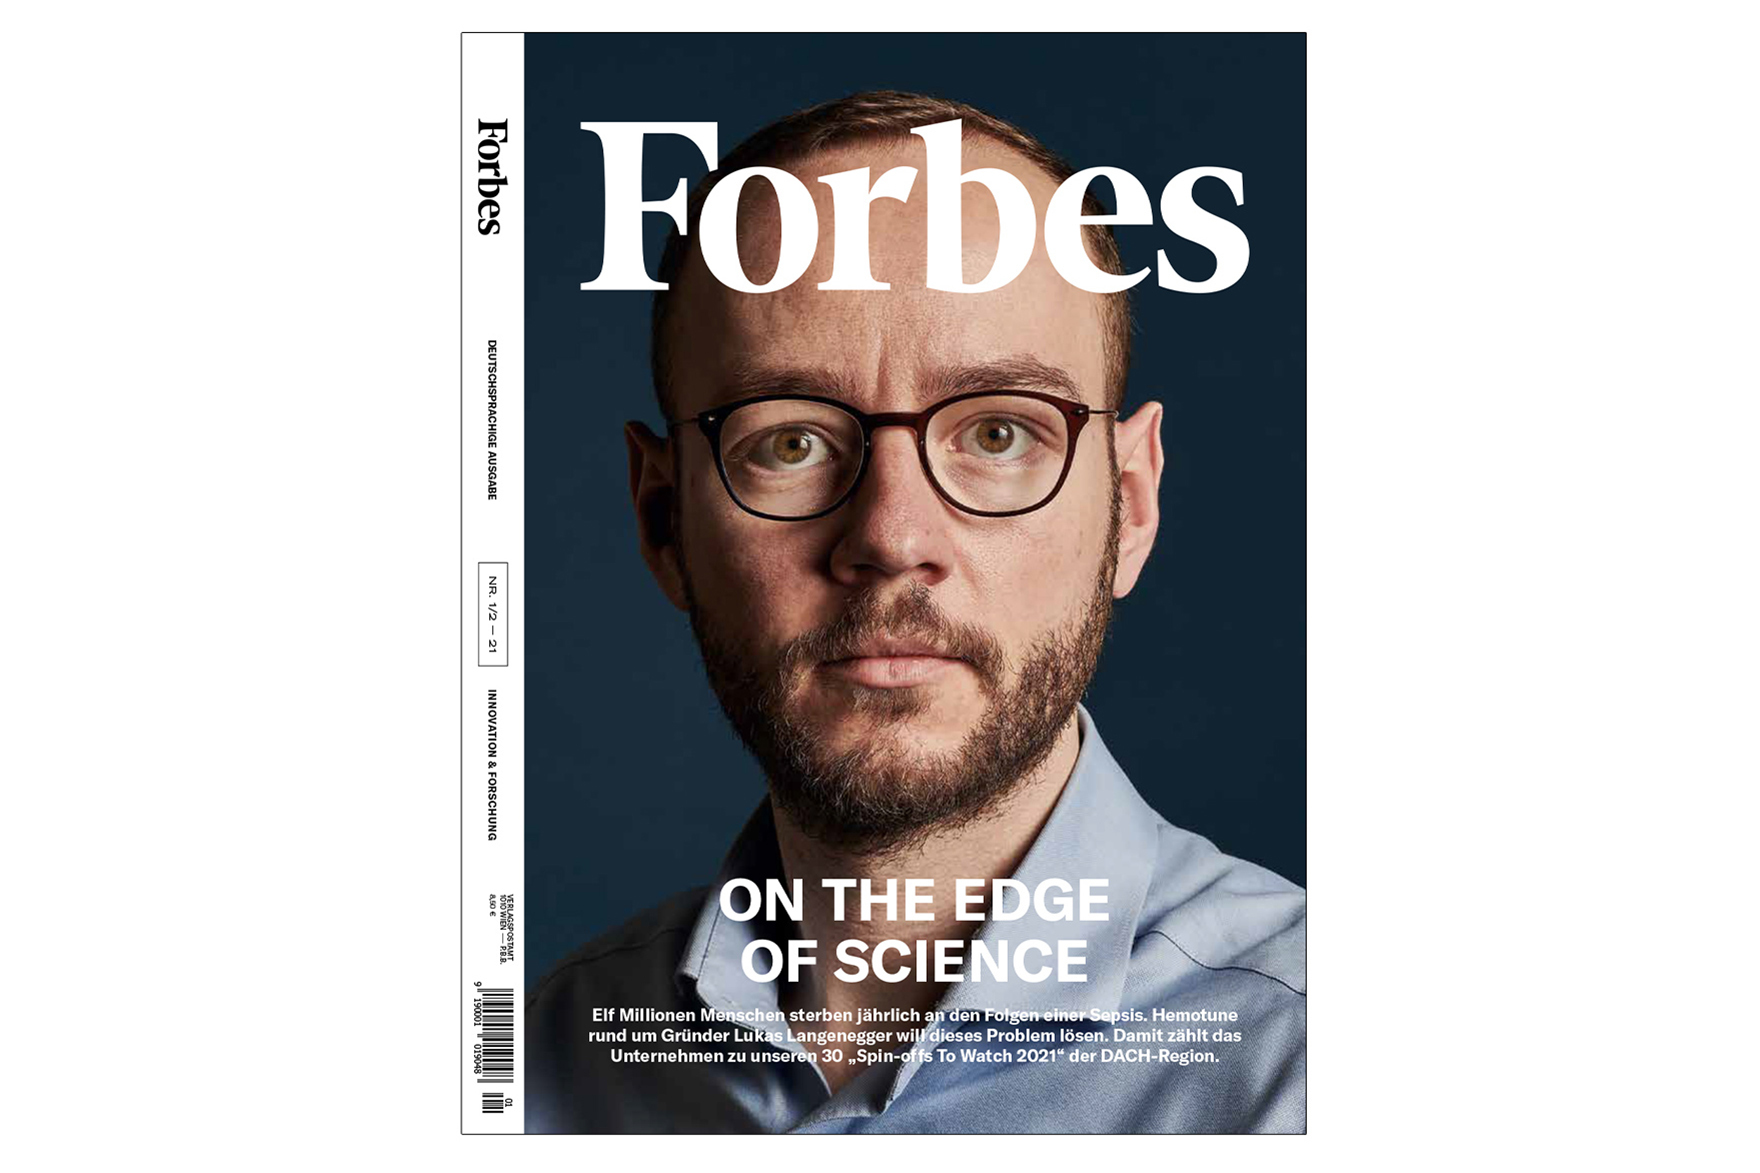 Lukas Langenegger is the cover of the January/February 2021 "Innovation & Research" issue of Forbes